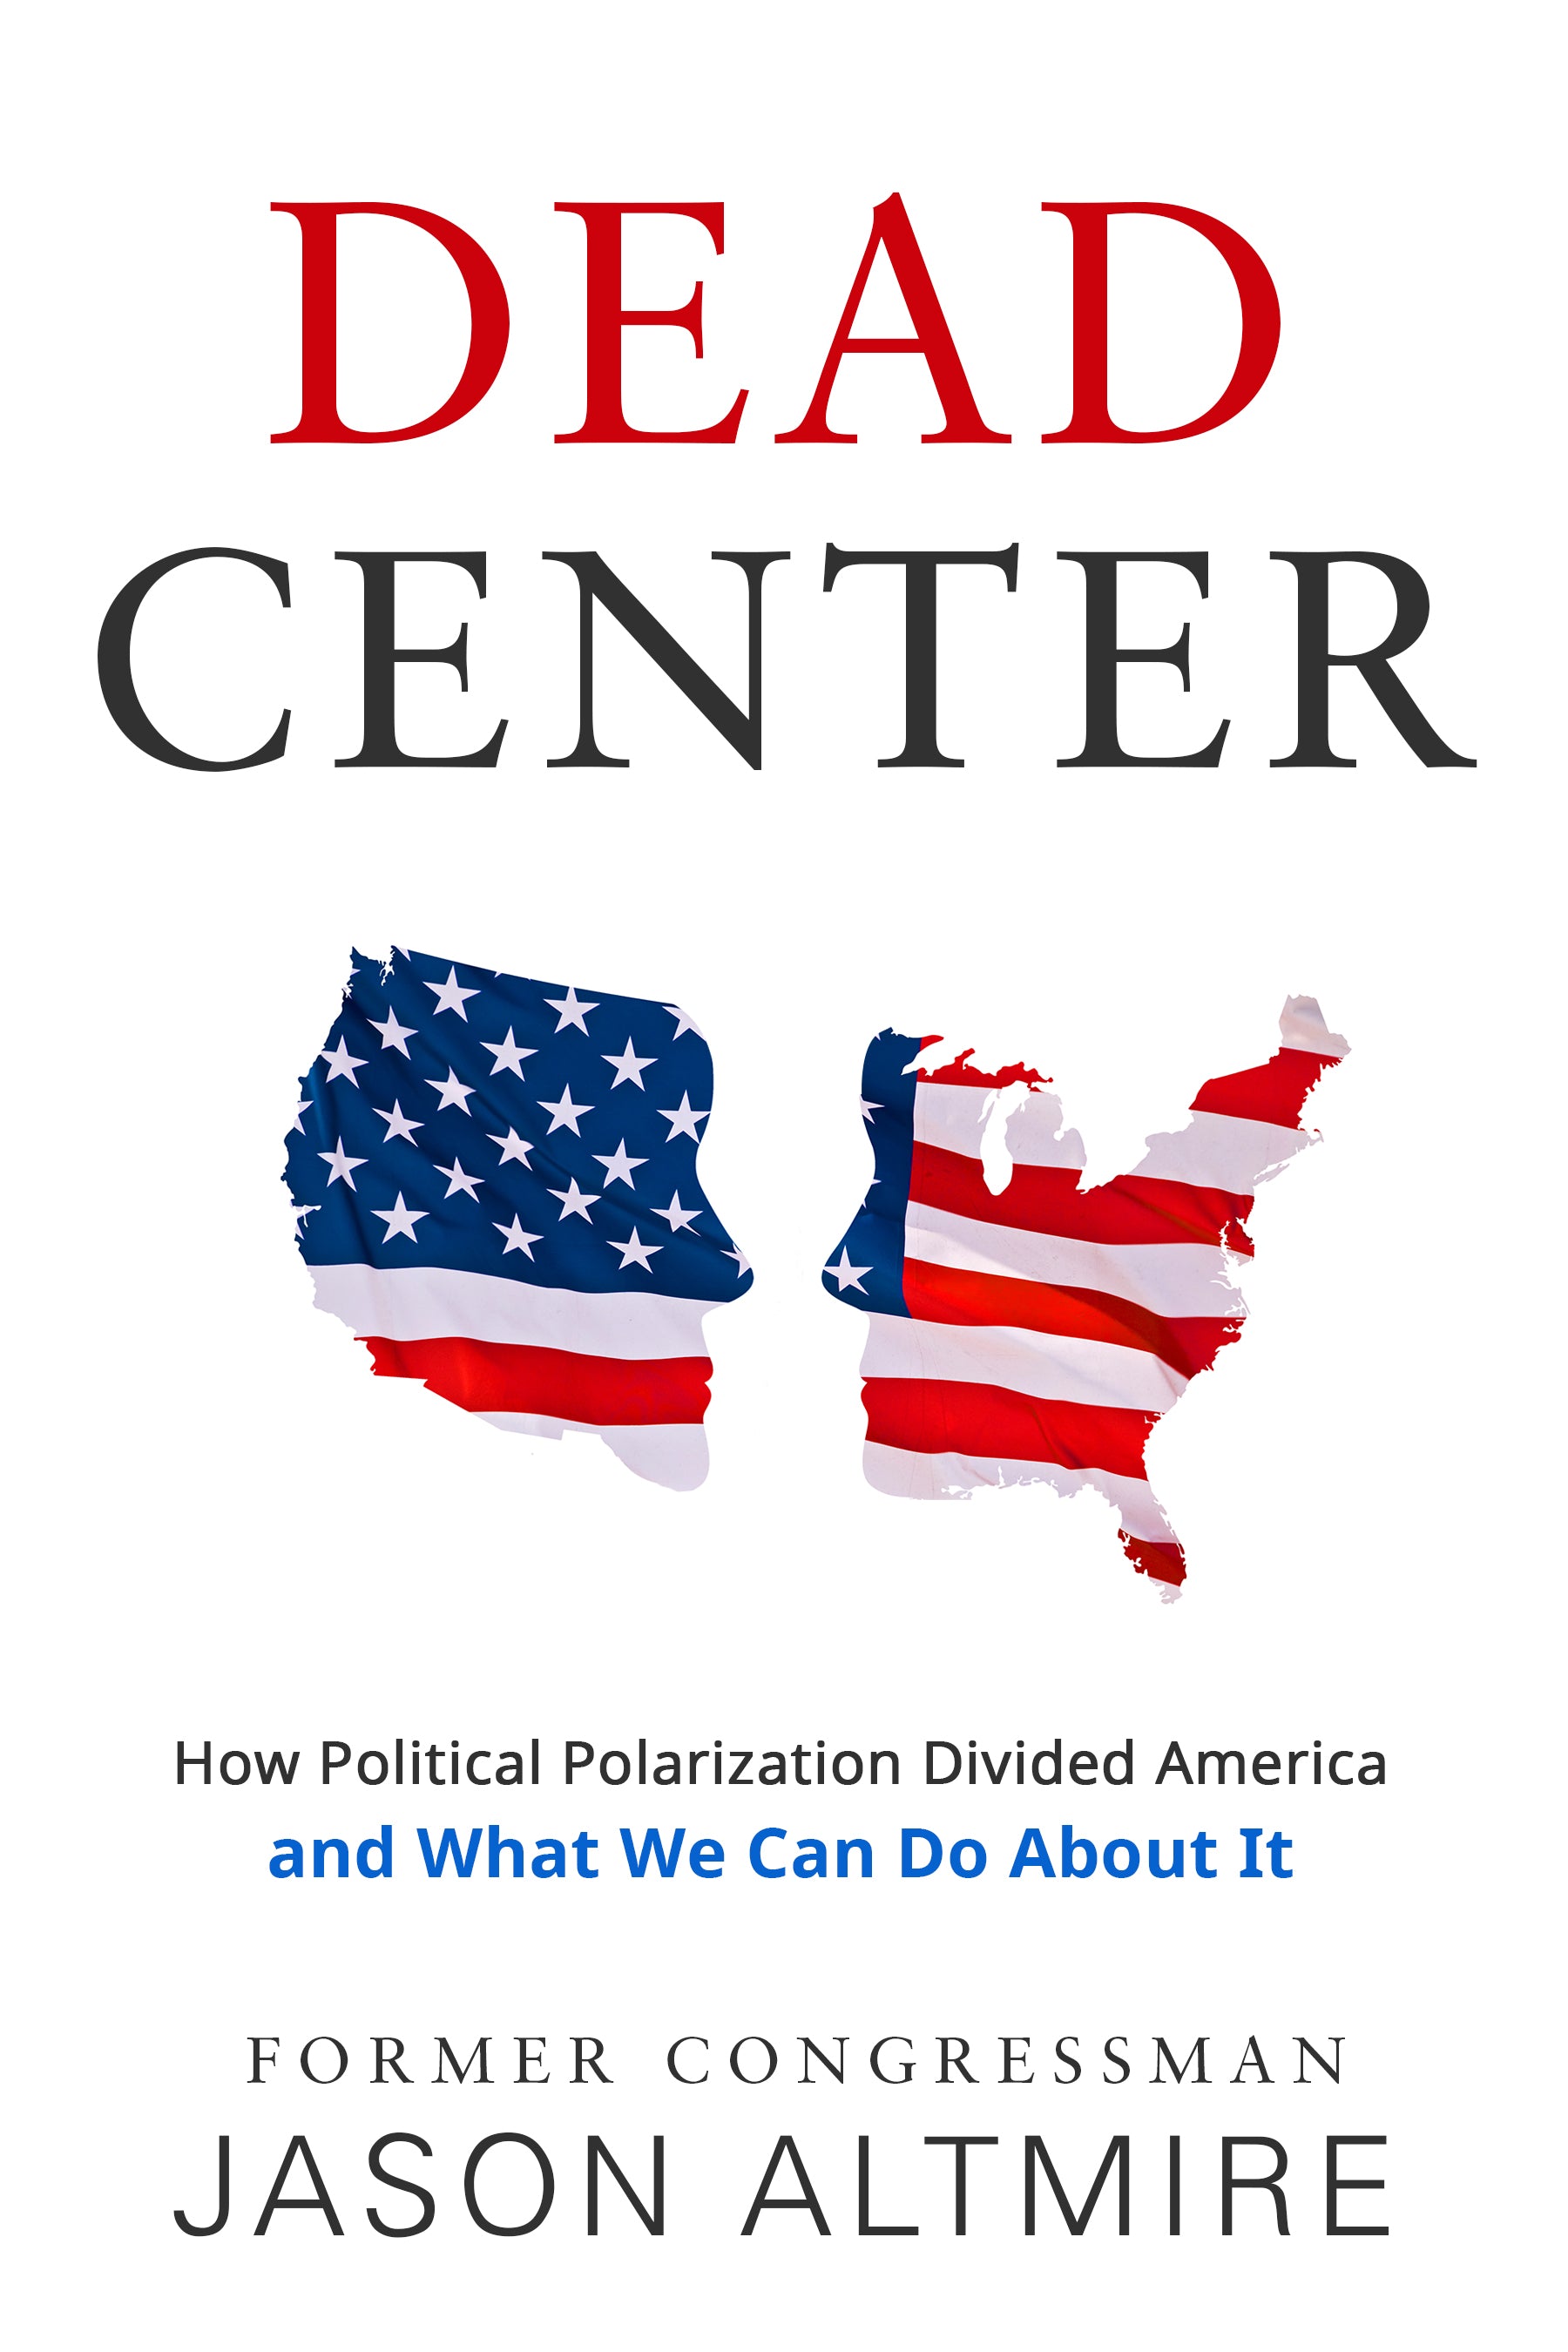 Ex-Congressman Jason Altmire provides solutions to our partisan divide in "Dead Center"